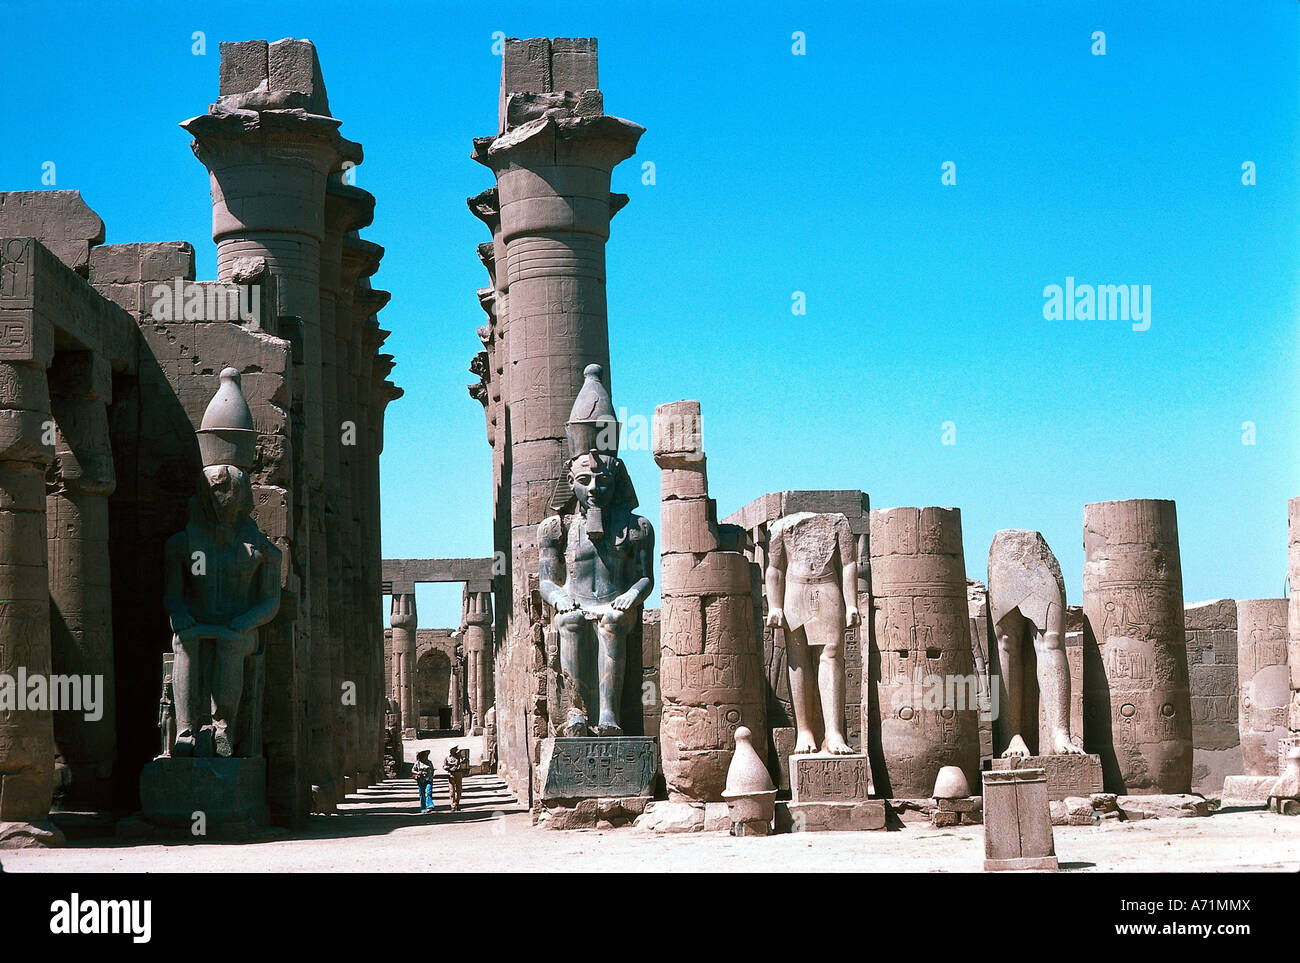 geography / travel, Egypt, Luxor, temple of Amun-Ra, court of King Ramesses, Ramses II., (reigned approx. 1290 - 1224 BC, 19th dynasty), view of colonnade of King Amenophis III. (reigned approx. 1490 - 1364 BC, 18th dynasty), seat statue of Ramesses, Ramses the great, part of complex of god Amon-Re in capital Thebes, architecture, religion, new empire, columns, column court, inner courtyard, fine arts, antiquity, historical, historic, ancient, Amun Ra, nineteenth, Amon Re, , Stock Photo